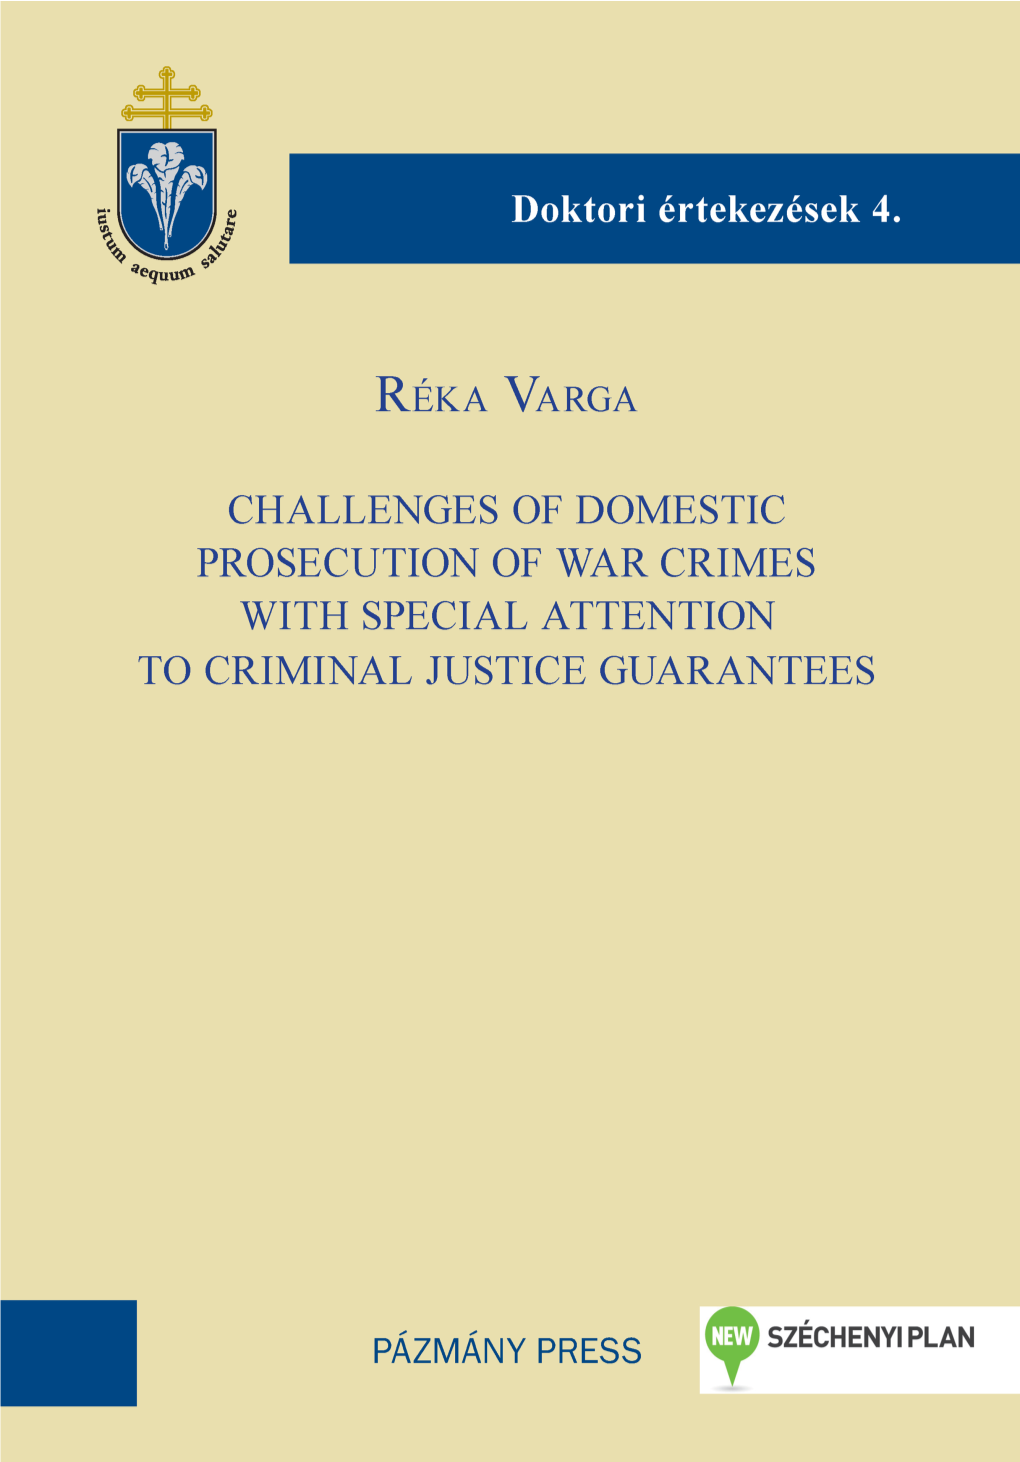 Challanges of Domestic Prosecution of War Crimes with Special Attention to Criminal Justice Guarantees